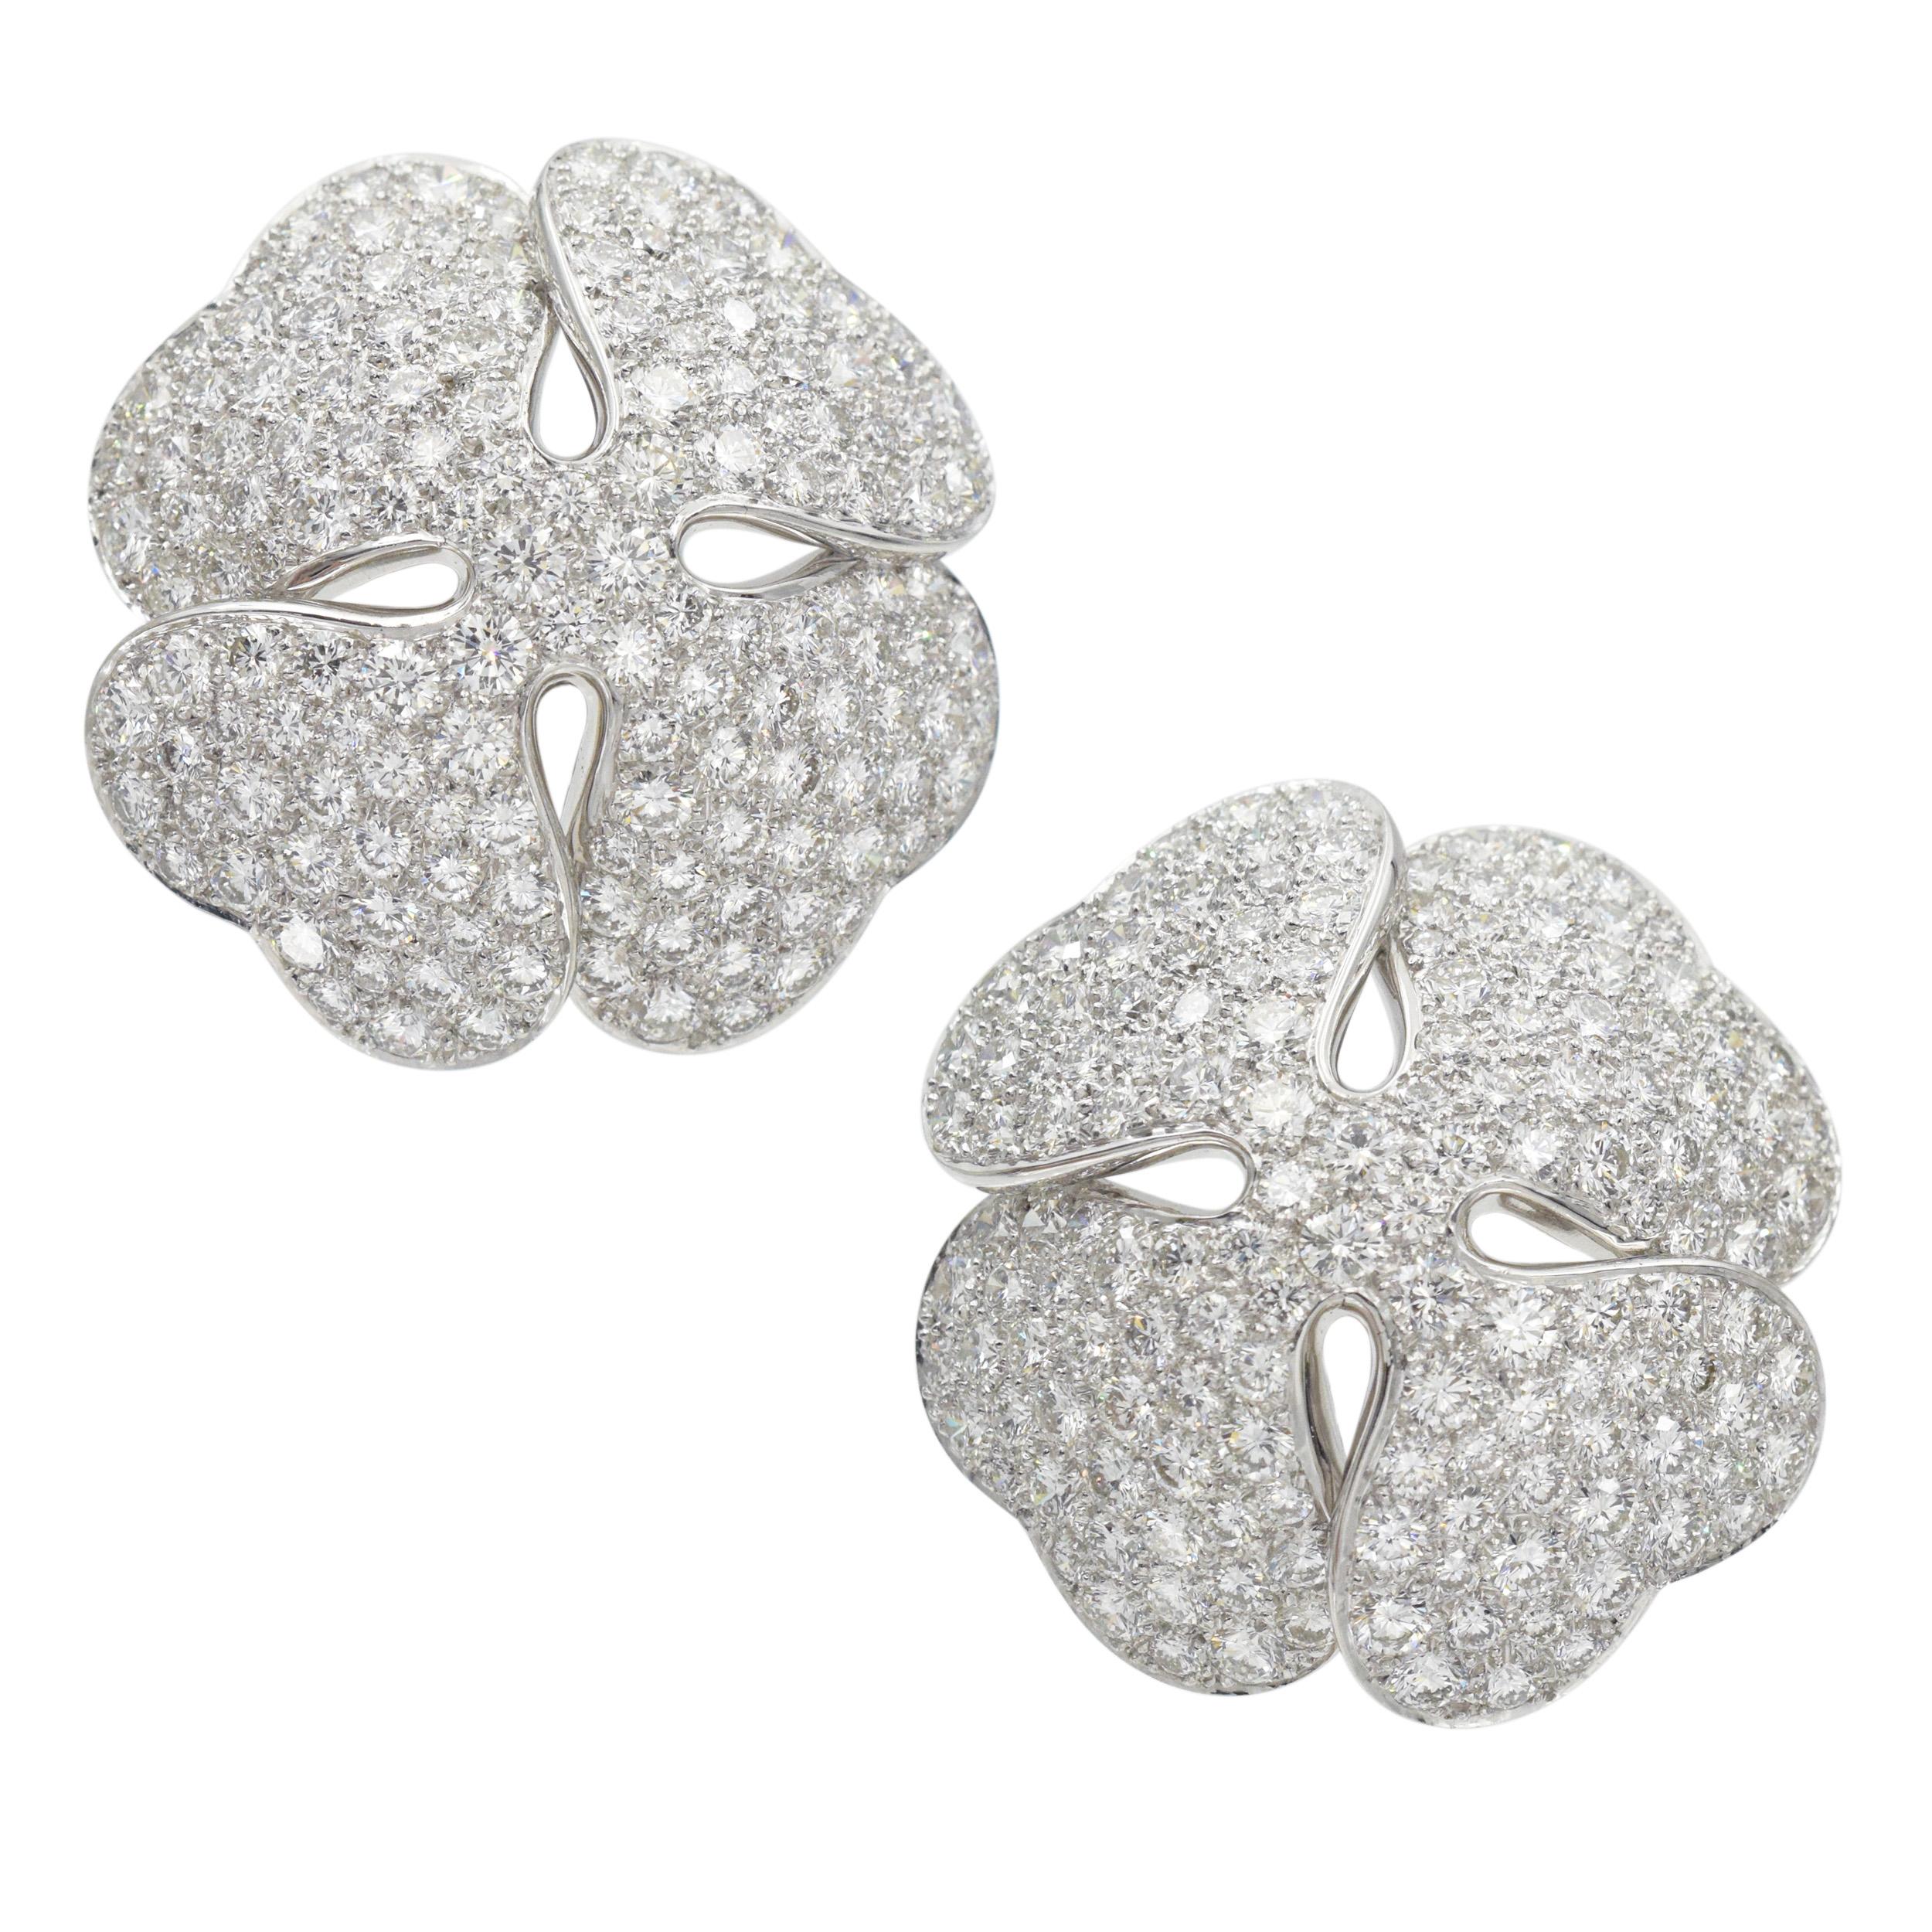 Cartier Anniversary Edition Diamond Clover Earrings in 18k white gold. The earrings are crafted in a four leaf clover design. Encrusted with round brilliant cut diamonds with total
weight of approximately 14.00ct, color E-F, clarity VS. Equipped